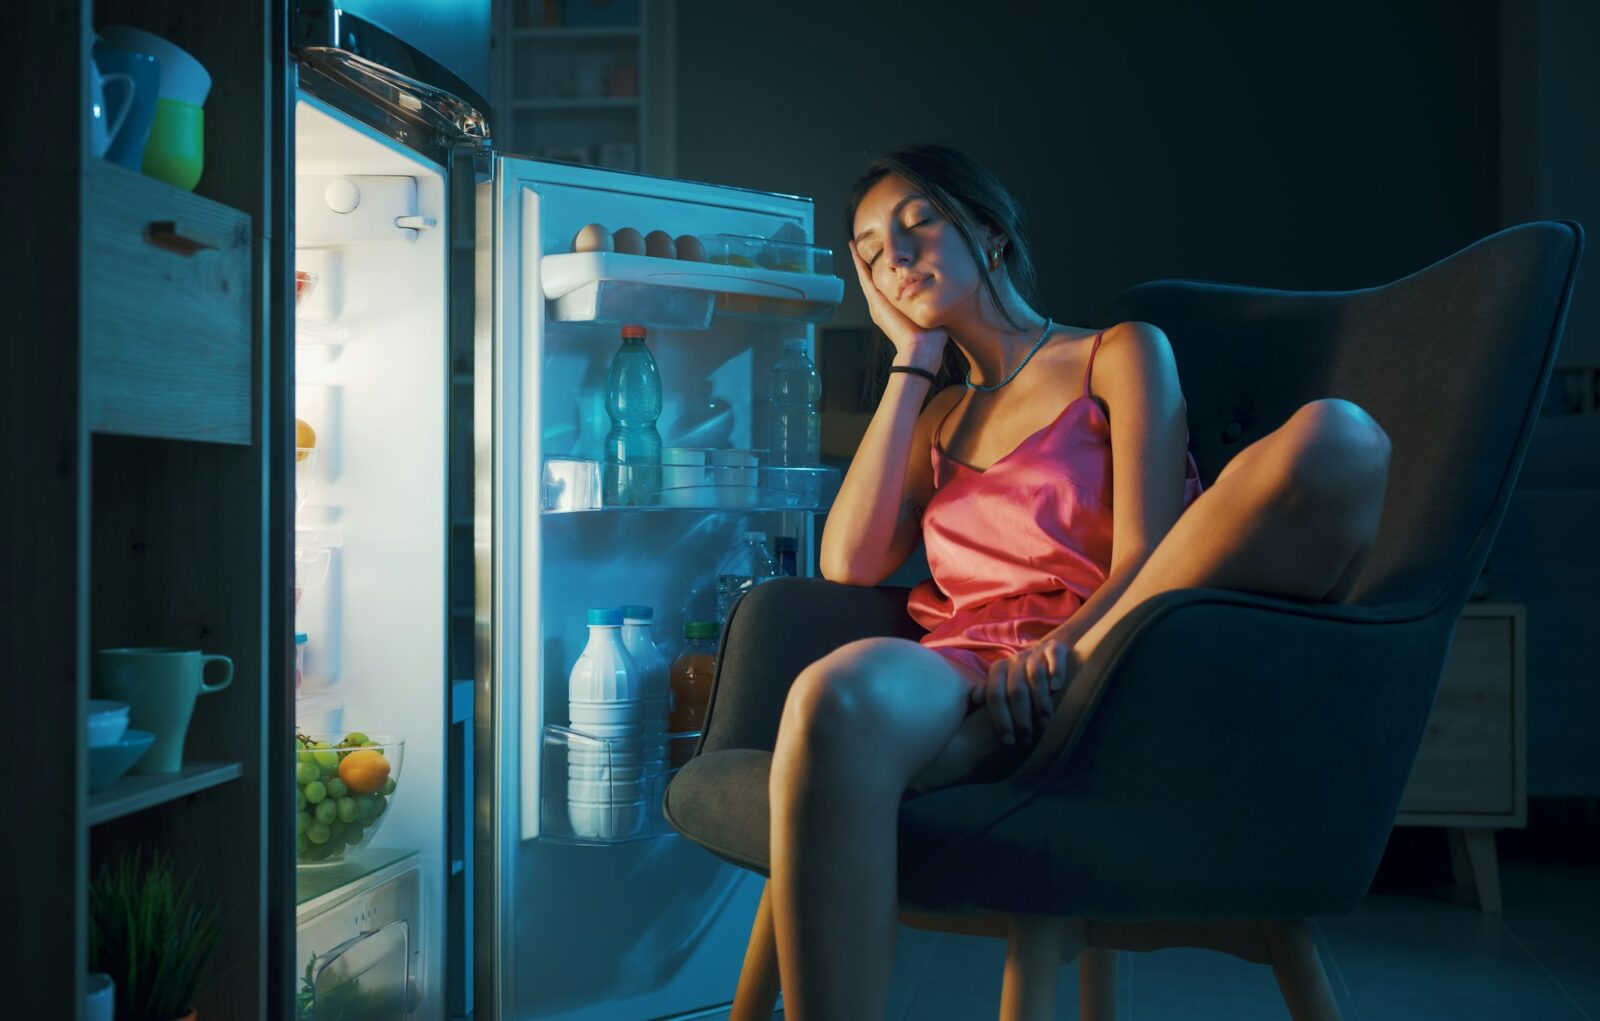 Woman suffering from the heat and sitting in front of the open fridge